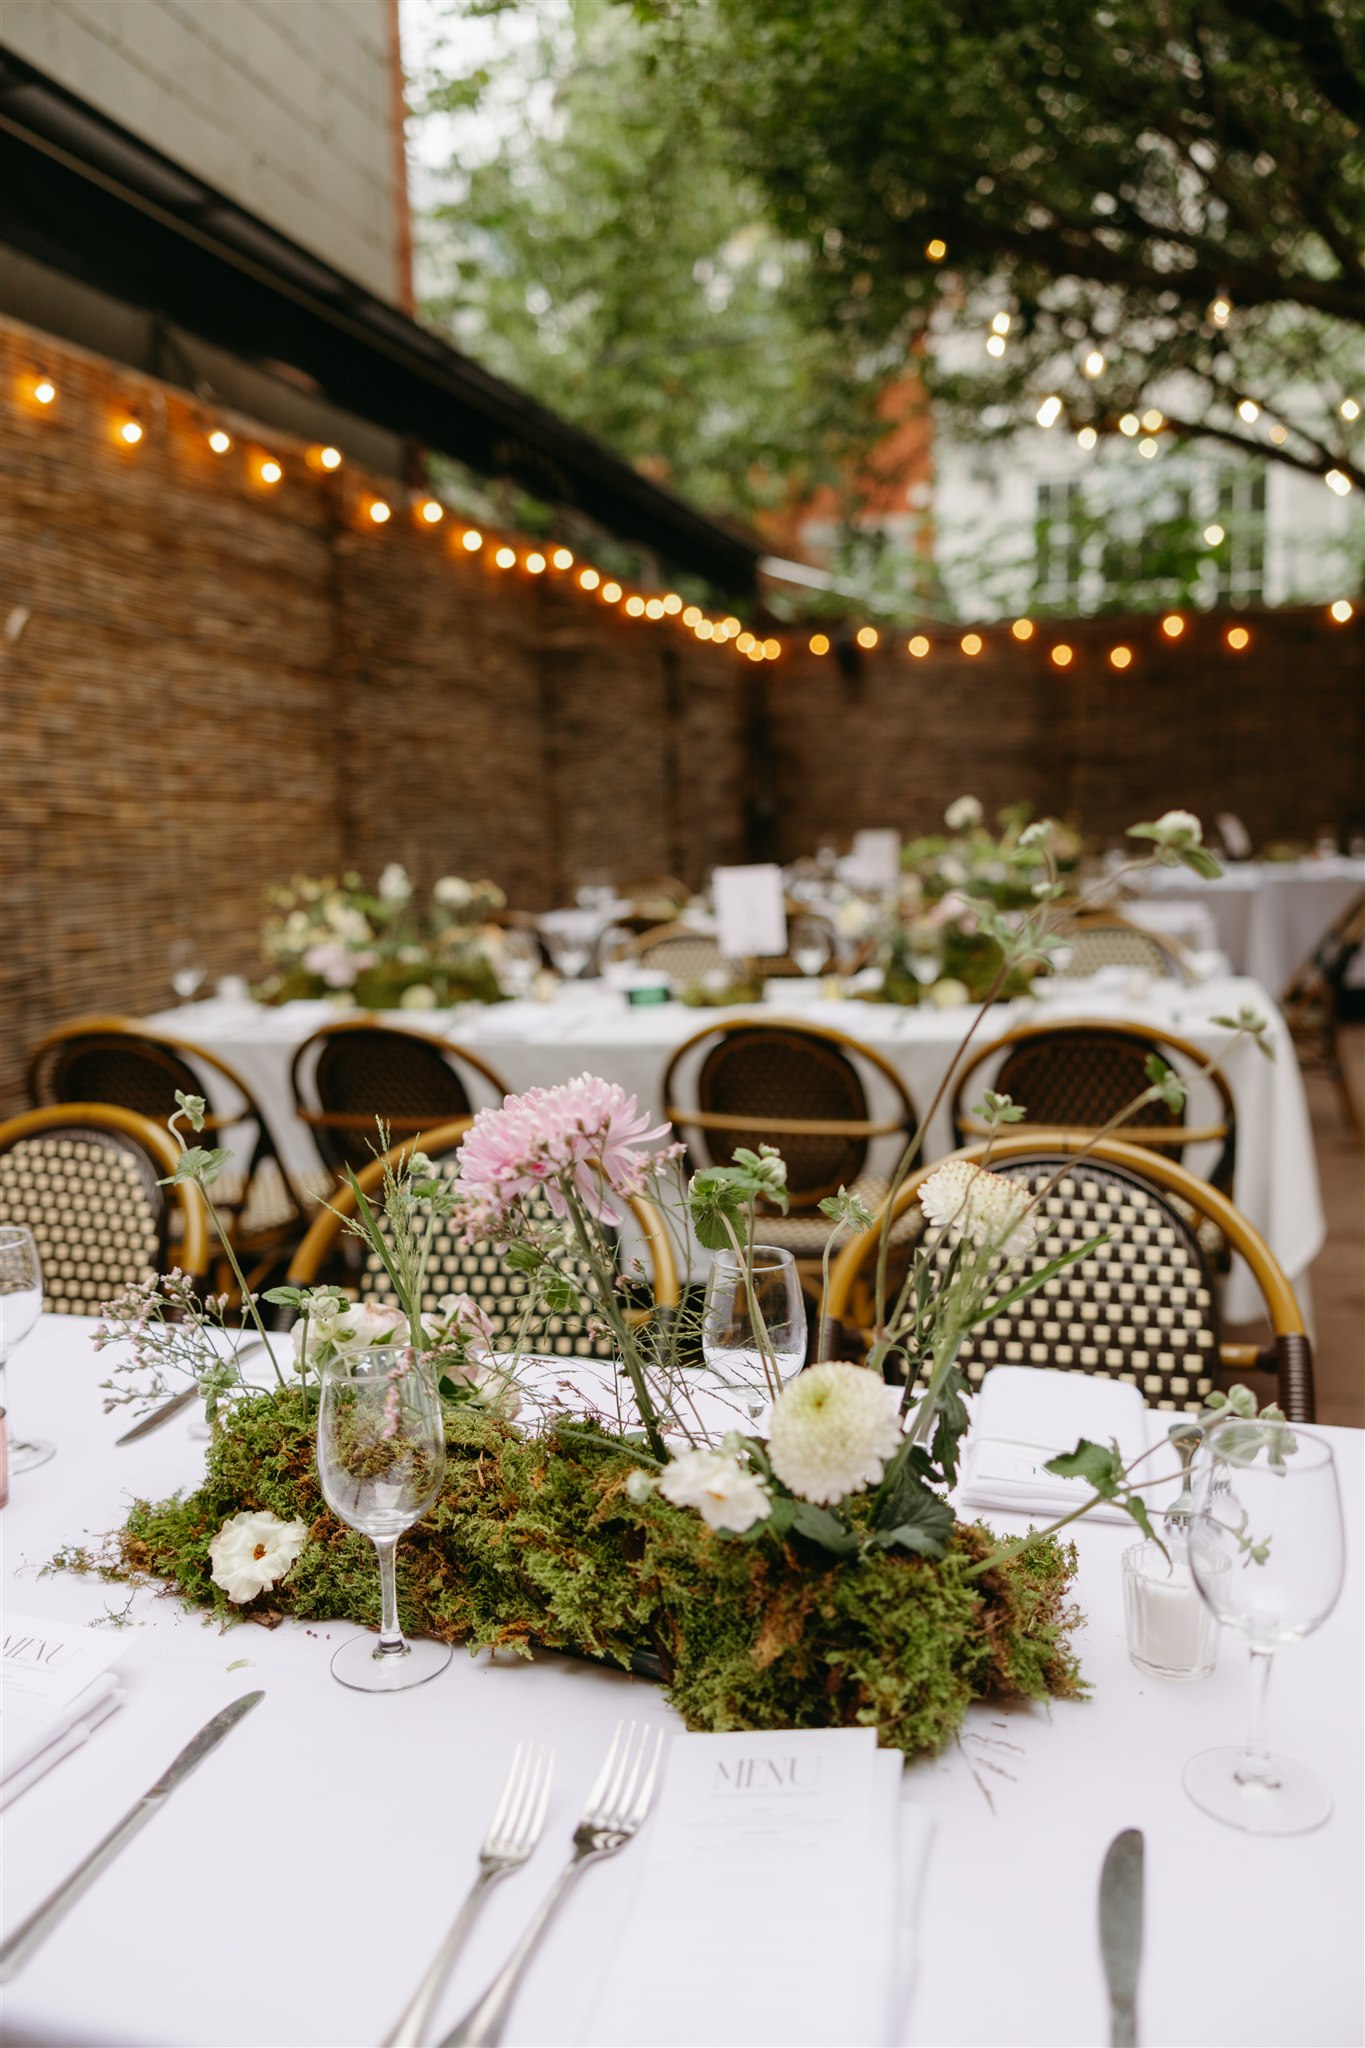 Outdoor dining area with wicker chairs and tables set with white tablecloths and floral centerpieces under string lights at an intimate restaurant wedding